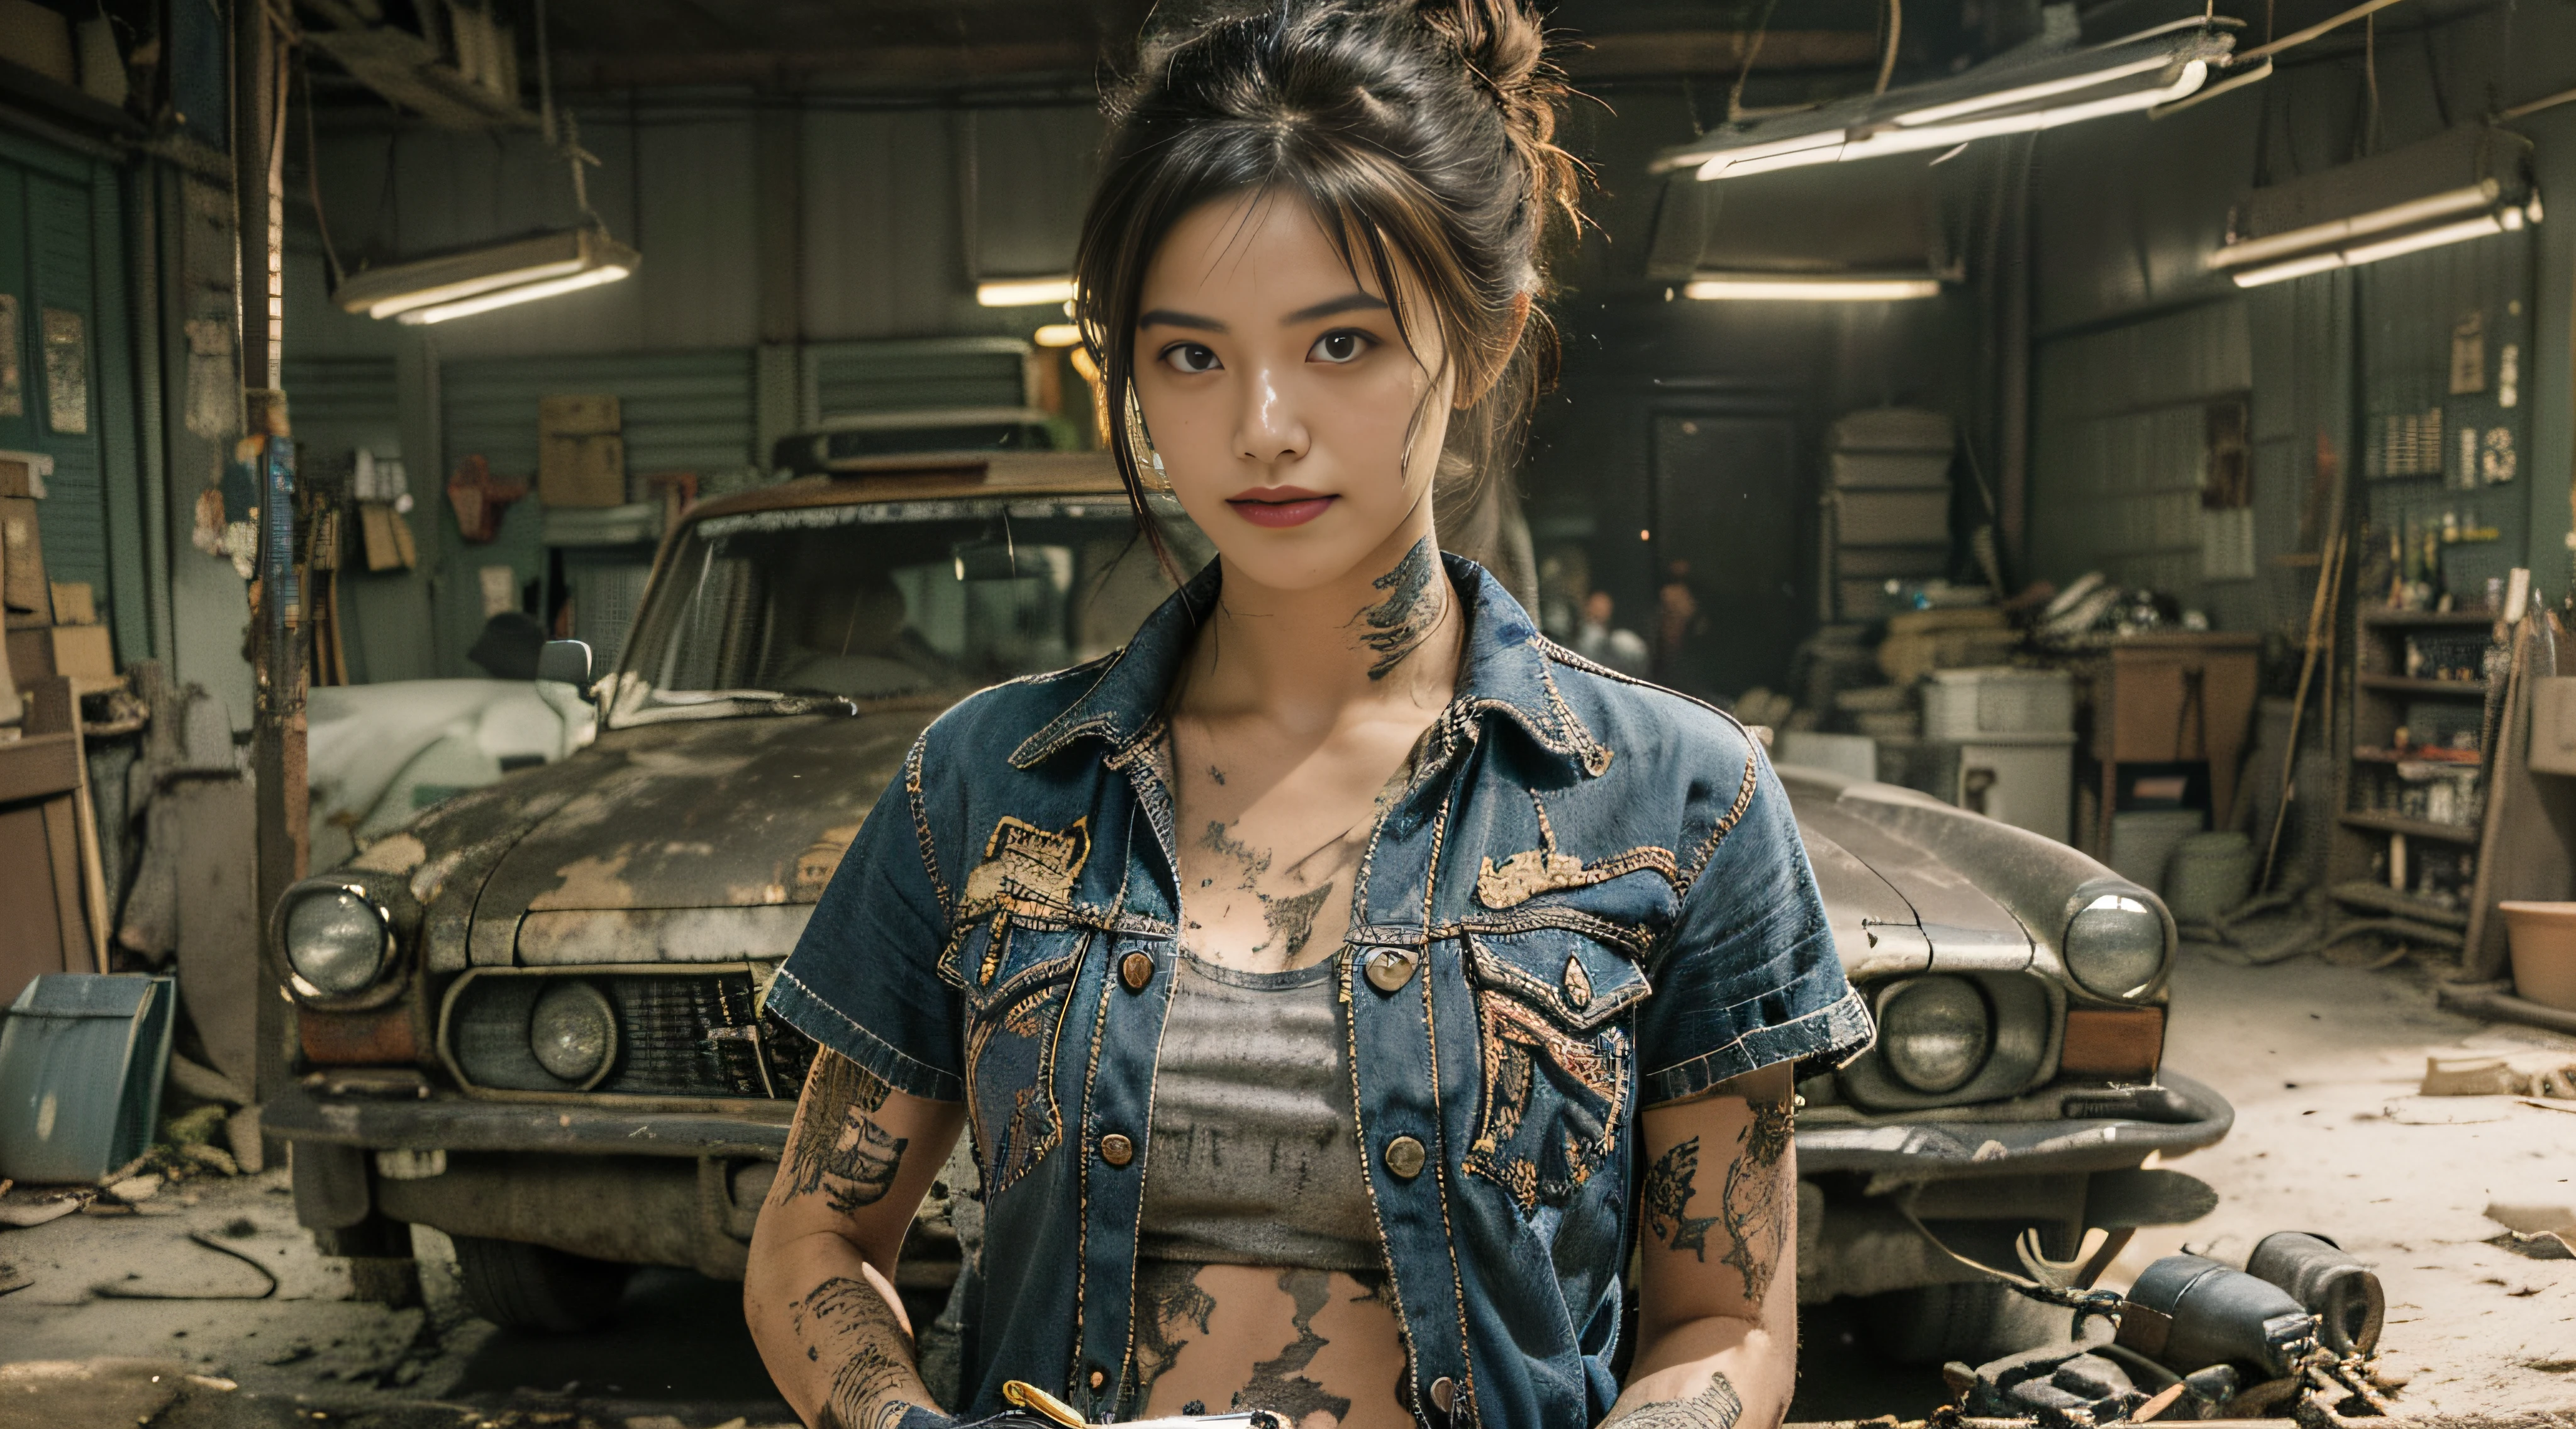 ((best quality)), ((masterpiece)), (detailed), mesmerizing and alluring female mechanic covered in grease,Confident smile，Look into the camera，(Dirty and rugged charm:1.2), (tough and confident demeanor:1.1), (mechanical expertise:1.3), disheveled hair, smudged face with a playful smirk, stained overalls clinging to her curves, (gritty tools of the trade:1.2), cluttered repair shop, scattered car parts, (authentic automotive ambiance:1.2), (intense gaze:1.1), gripping a wrench in her dirty hands, 8k resolution,looking at another, looking away,( tattoo:1.2), masterpiece, best quality,Photorealistic, ultra-high resolution, photographic light